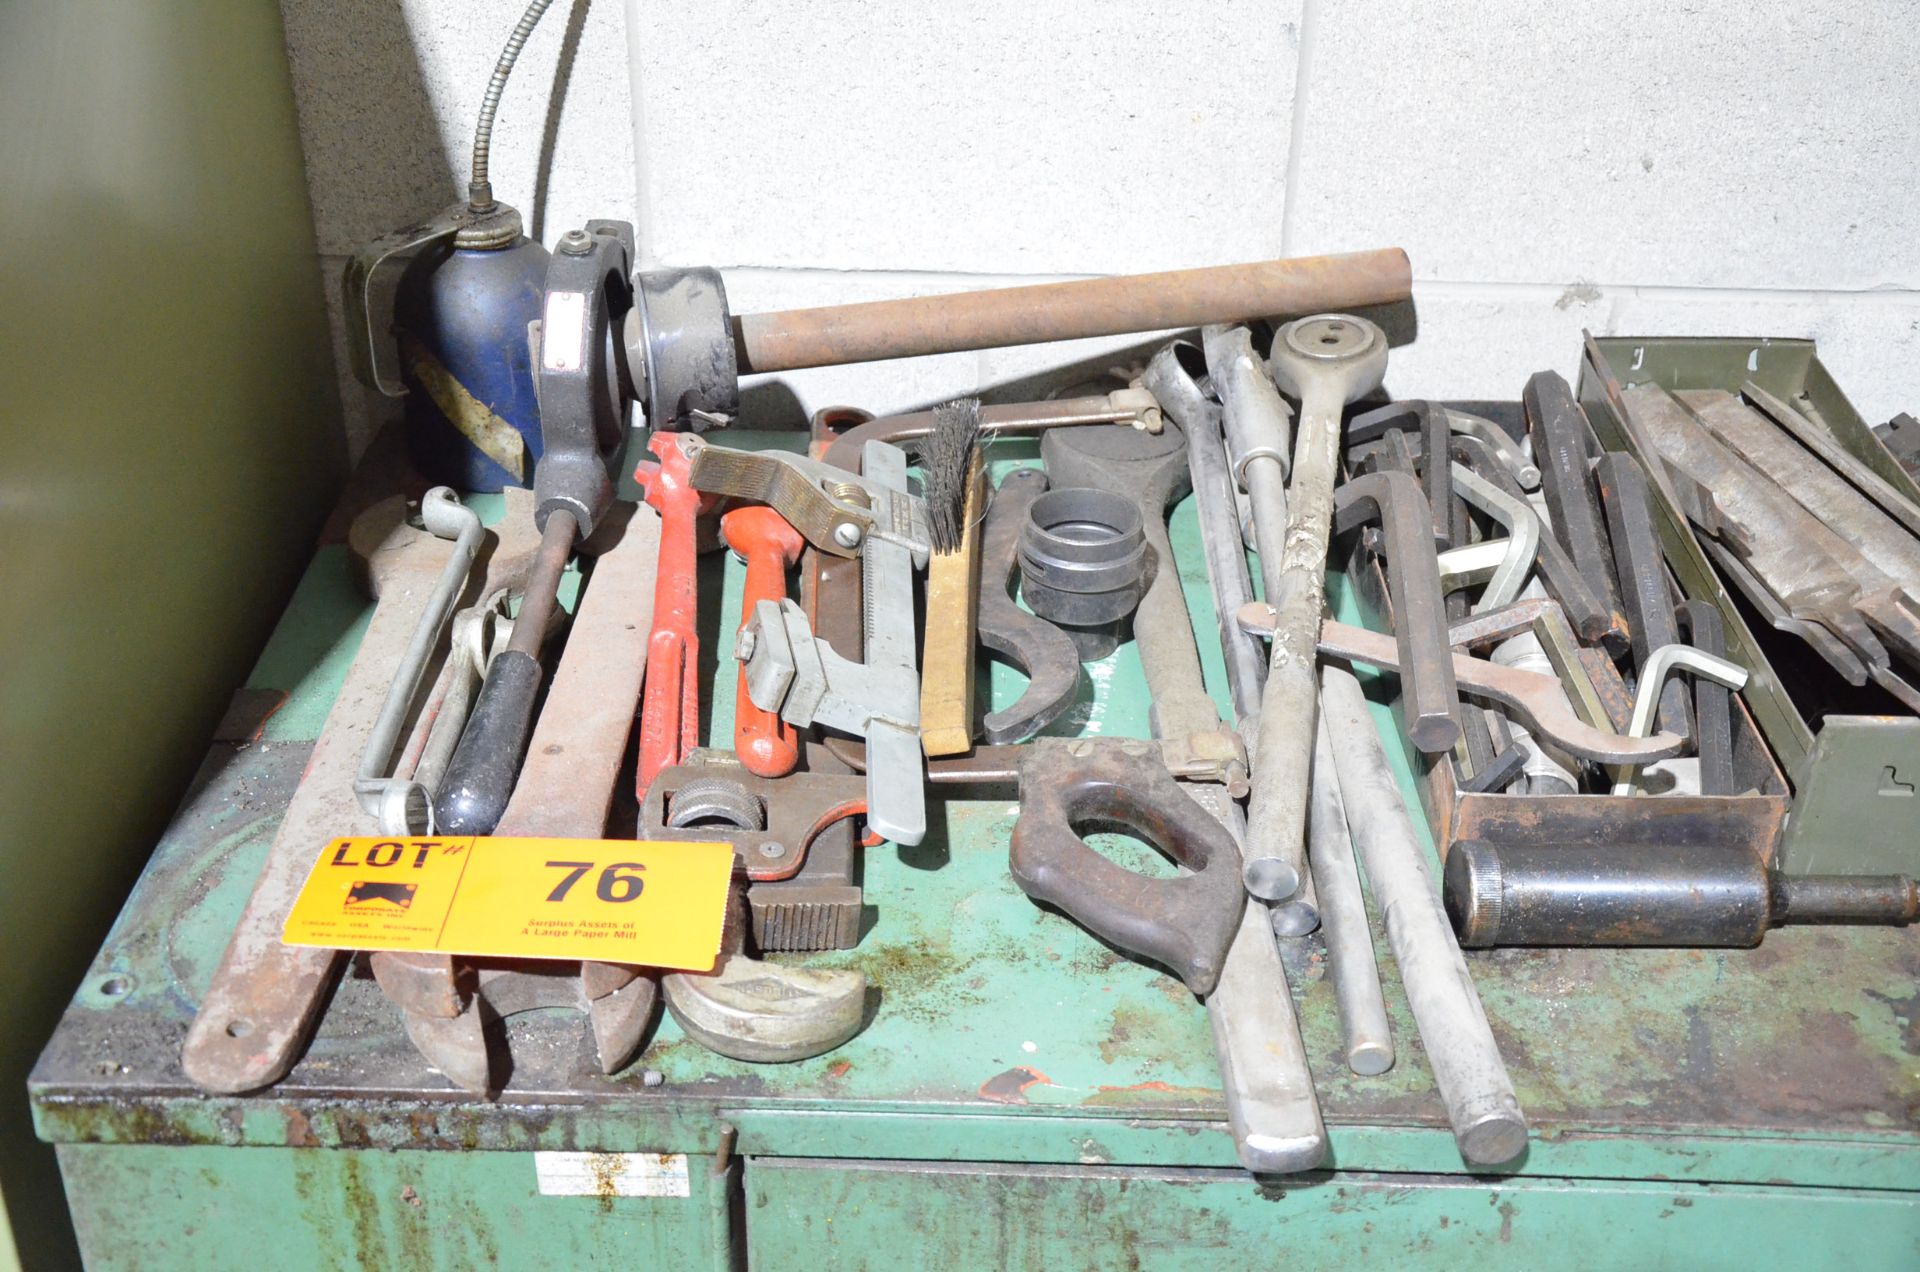 LOT/ HAND TOOLS [RIGGING FEE FOR LOT #76 - $TBD USD PLUS APPLICABLE TAXES]